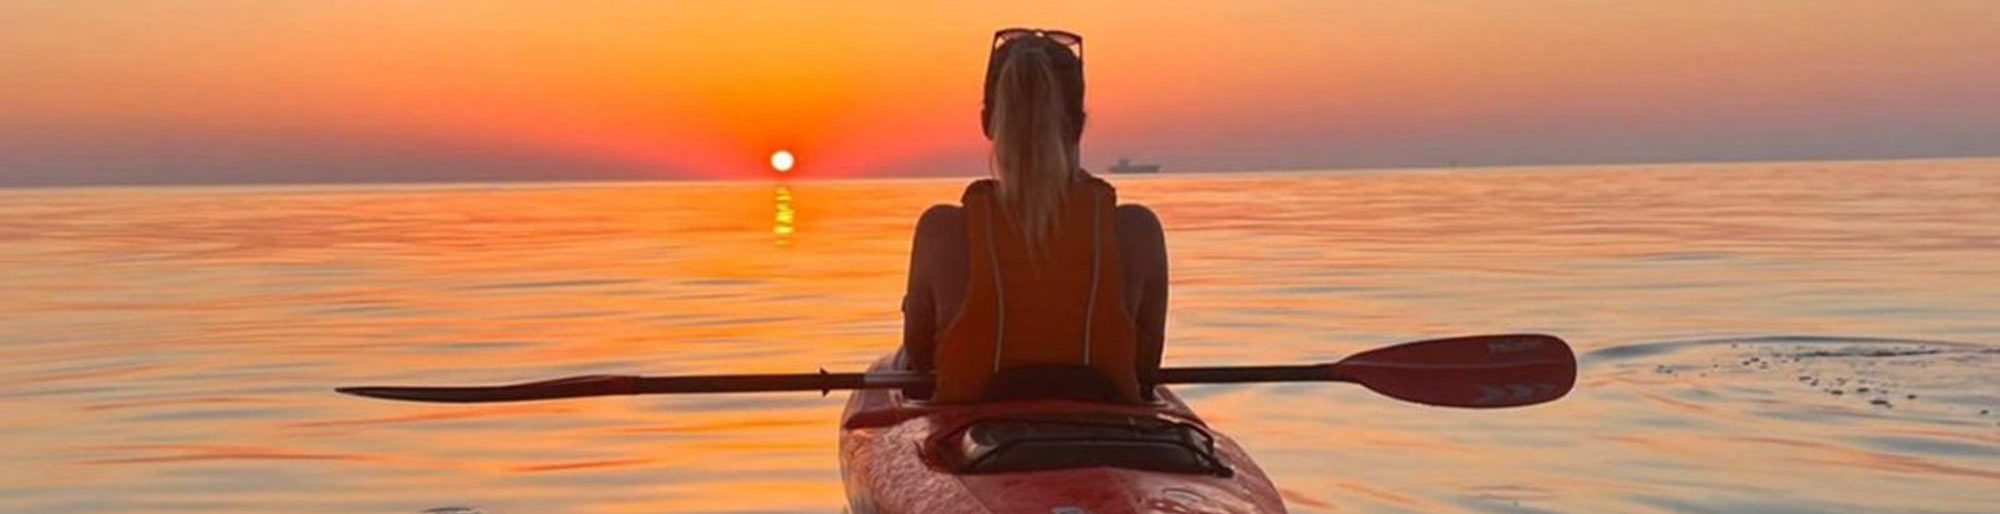 A woman sits in a kayak, facing towards the horizon as the sun sets. She appears contemplative, with a mix of nostalgia and excitement for the new chapter in her life. The vast expanse of water stretches before her, symbolizing the journey ahead filled with decisions and adventures.